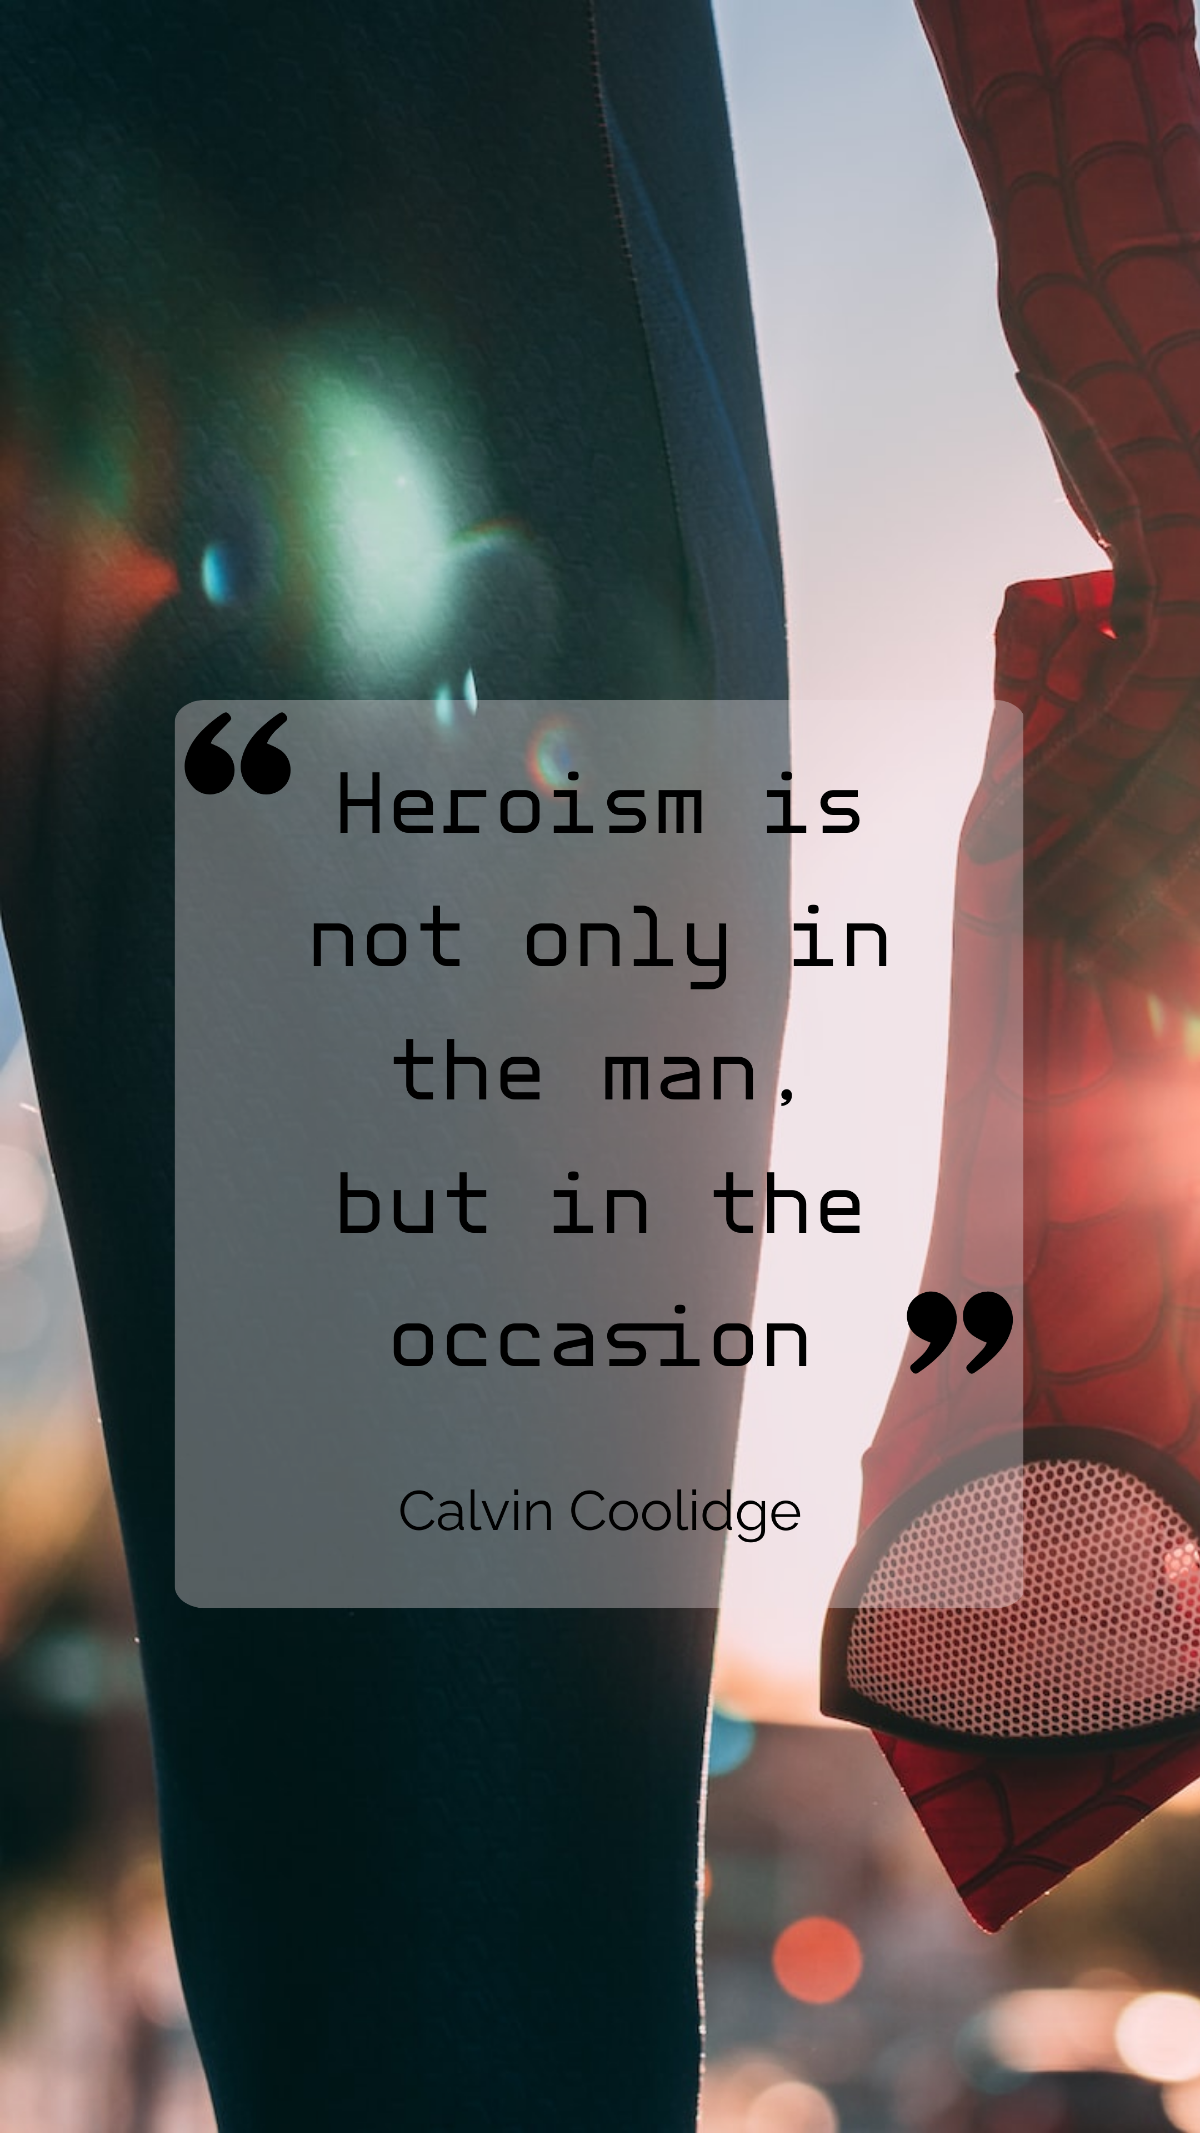 Calvin Coolidge - Heroism is not only in the man, but in the occasion